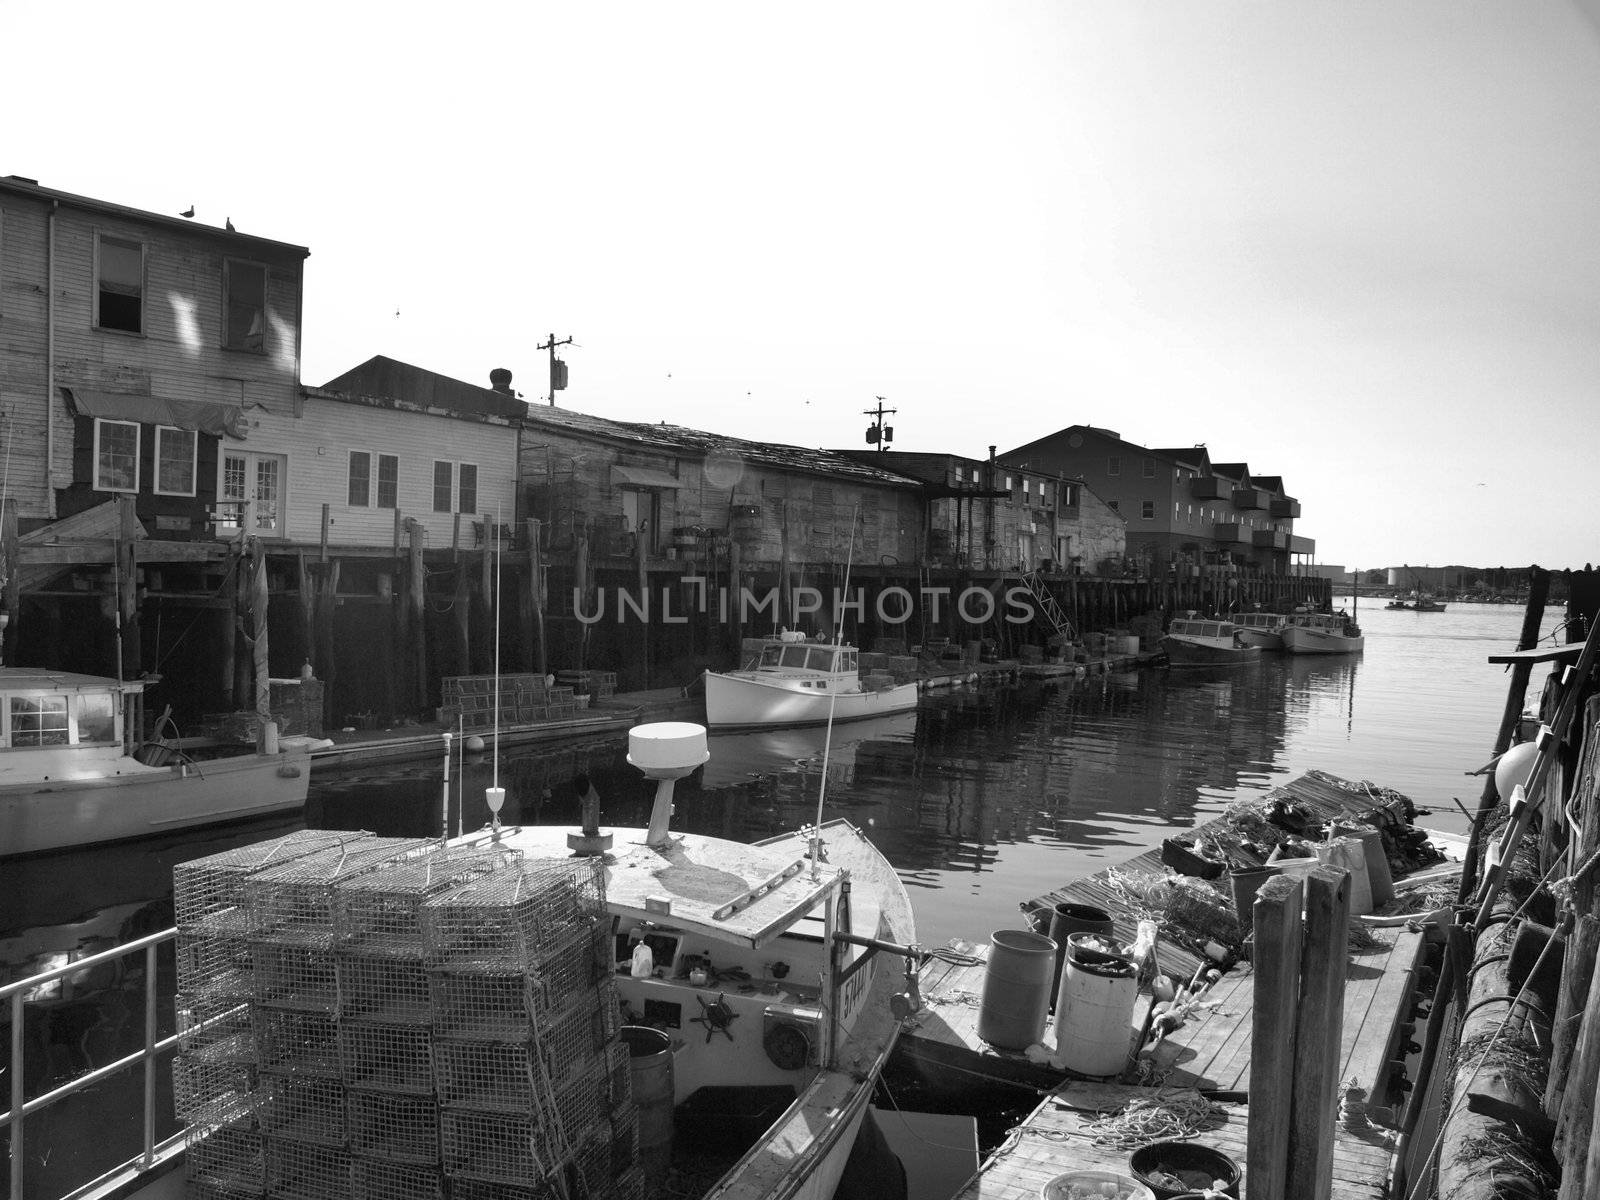 A working lobster boat along the dock in Portland, Maine during the summer. Shown in black and white